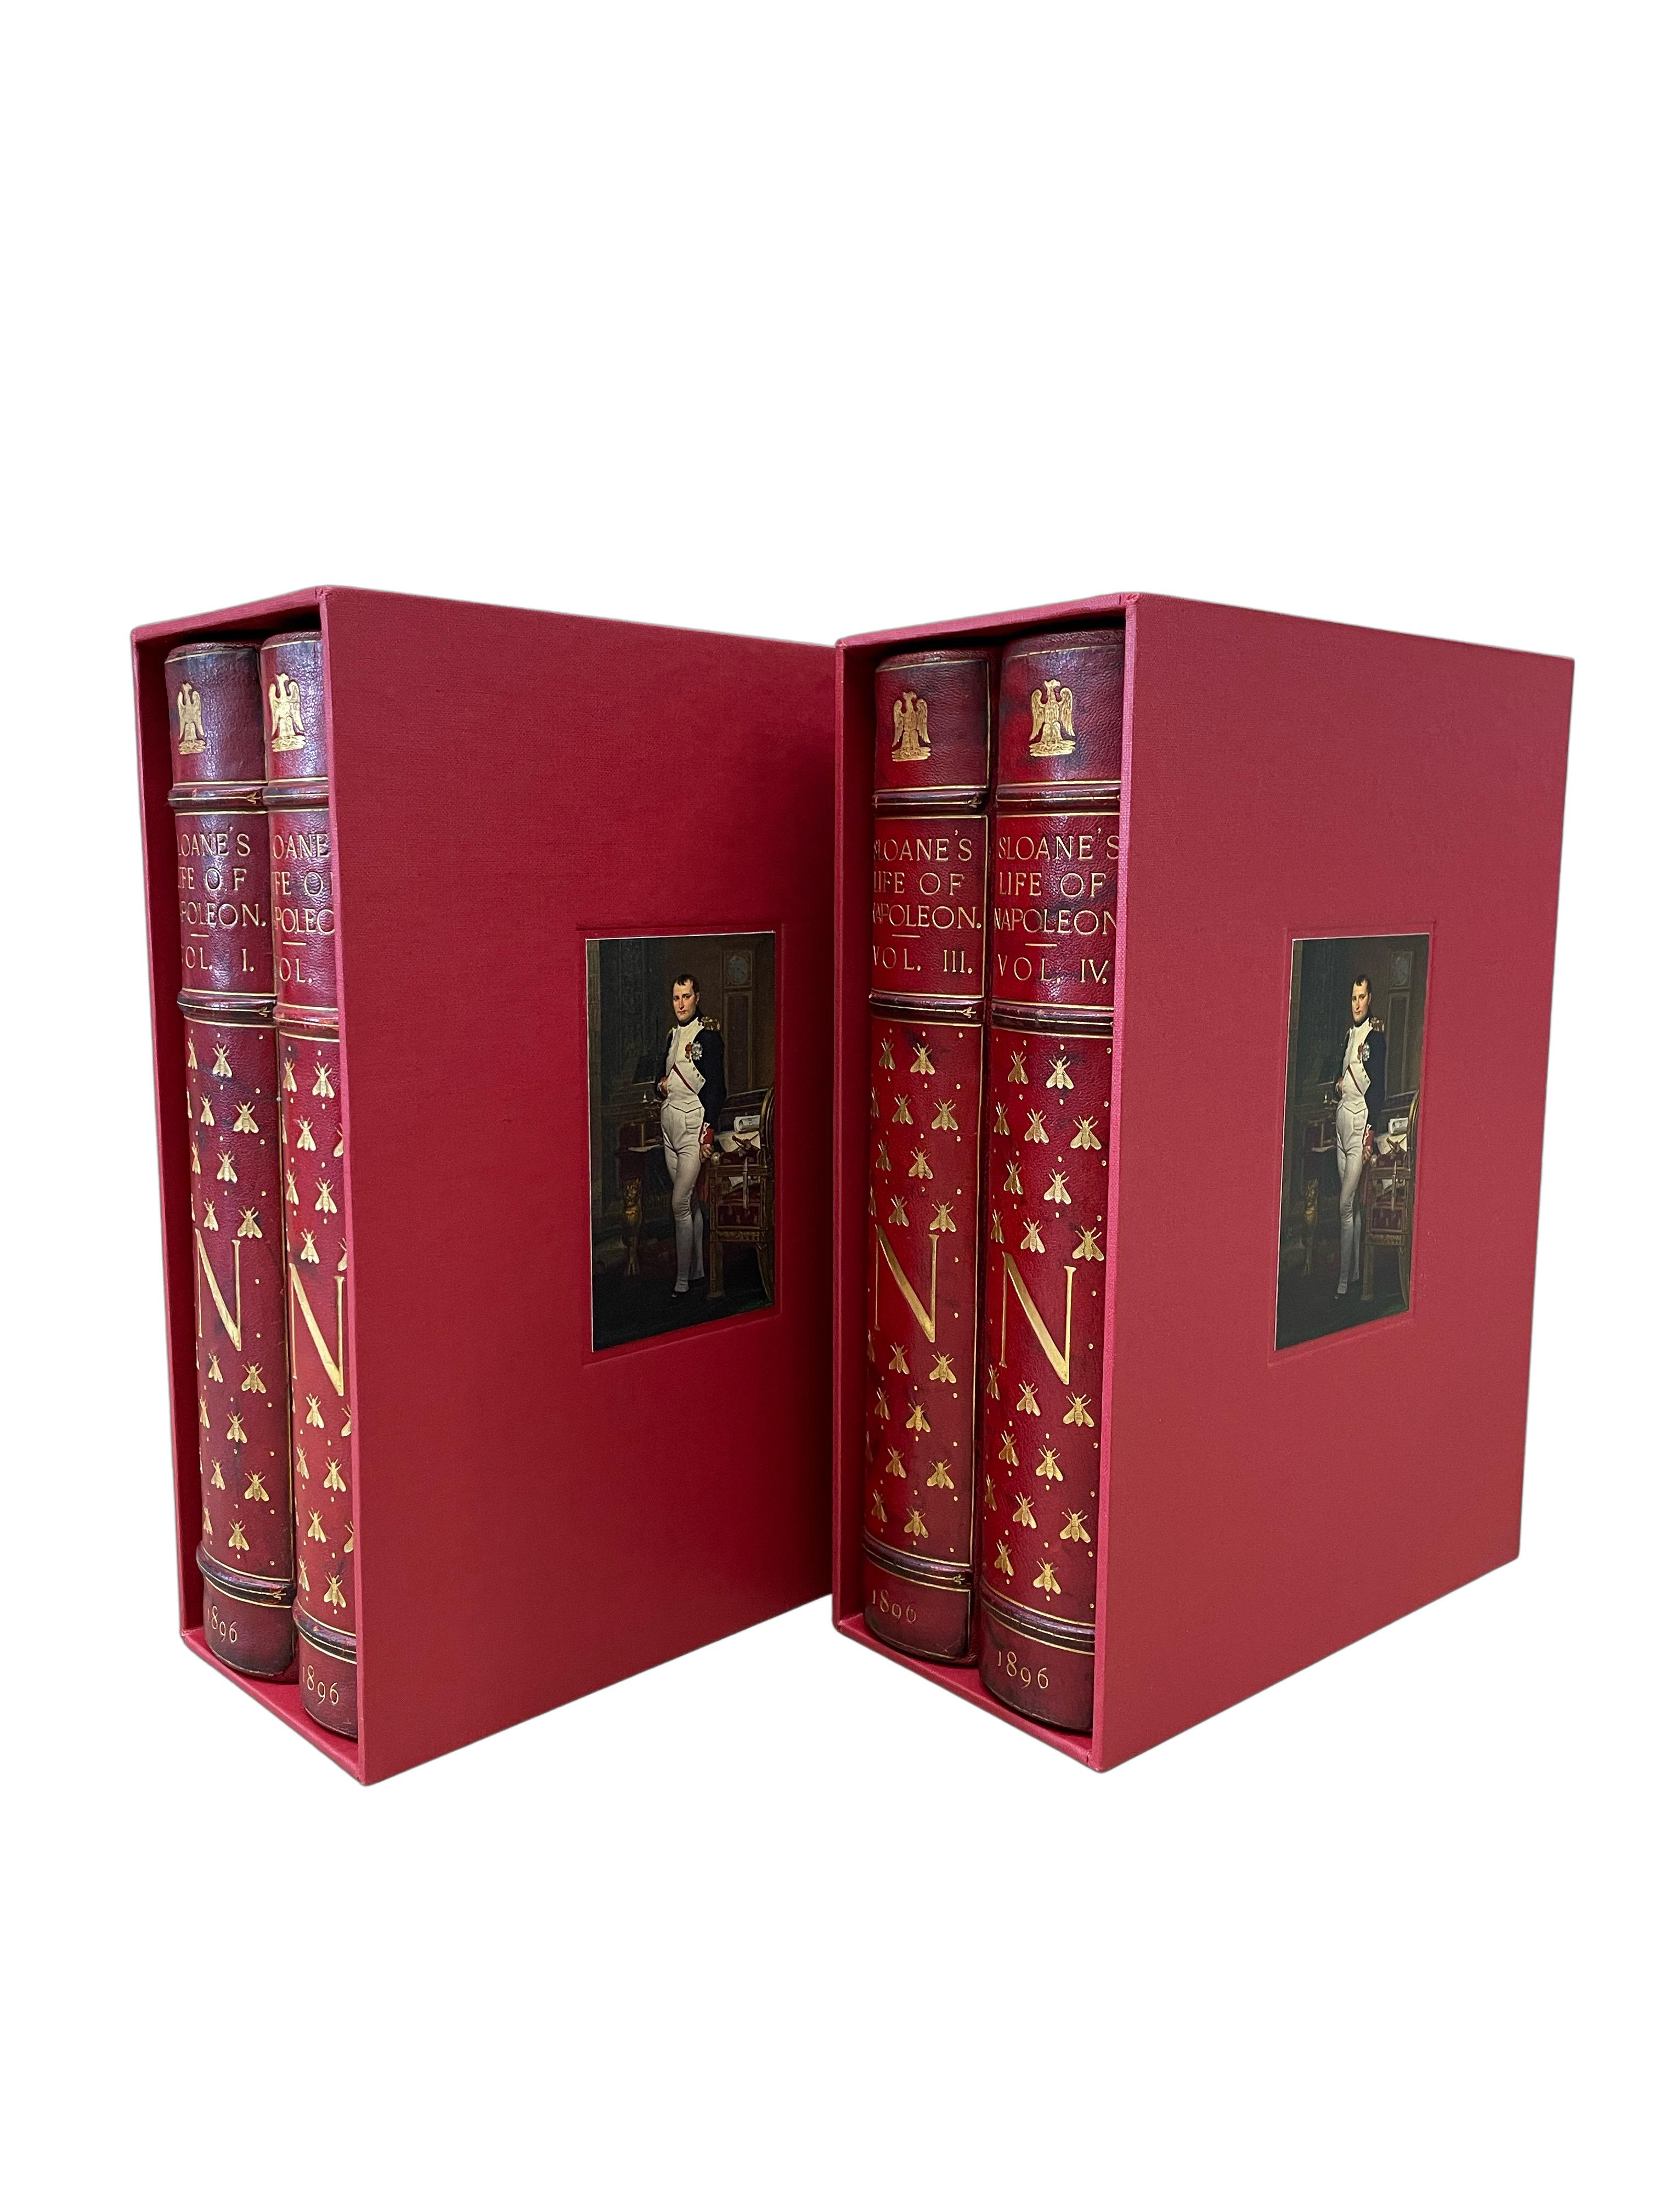 Sloane, William Milligan. The Life of Napoleon Bonaparte. New York: Century Co, 1896. Four volume quarto set. Handsomely bound in half red Moroccan leather and cloth boards, spines ruled and lettered in gilt, top edge gilt, and Napoleon’s bee